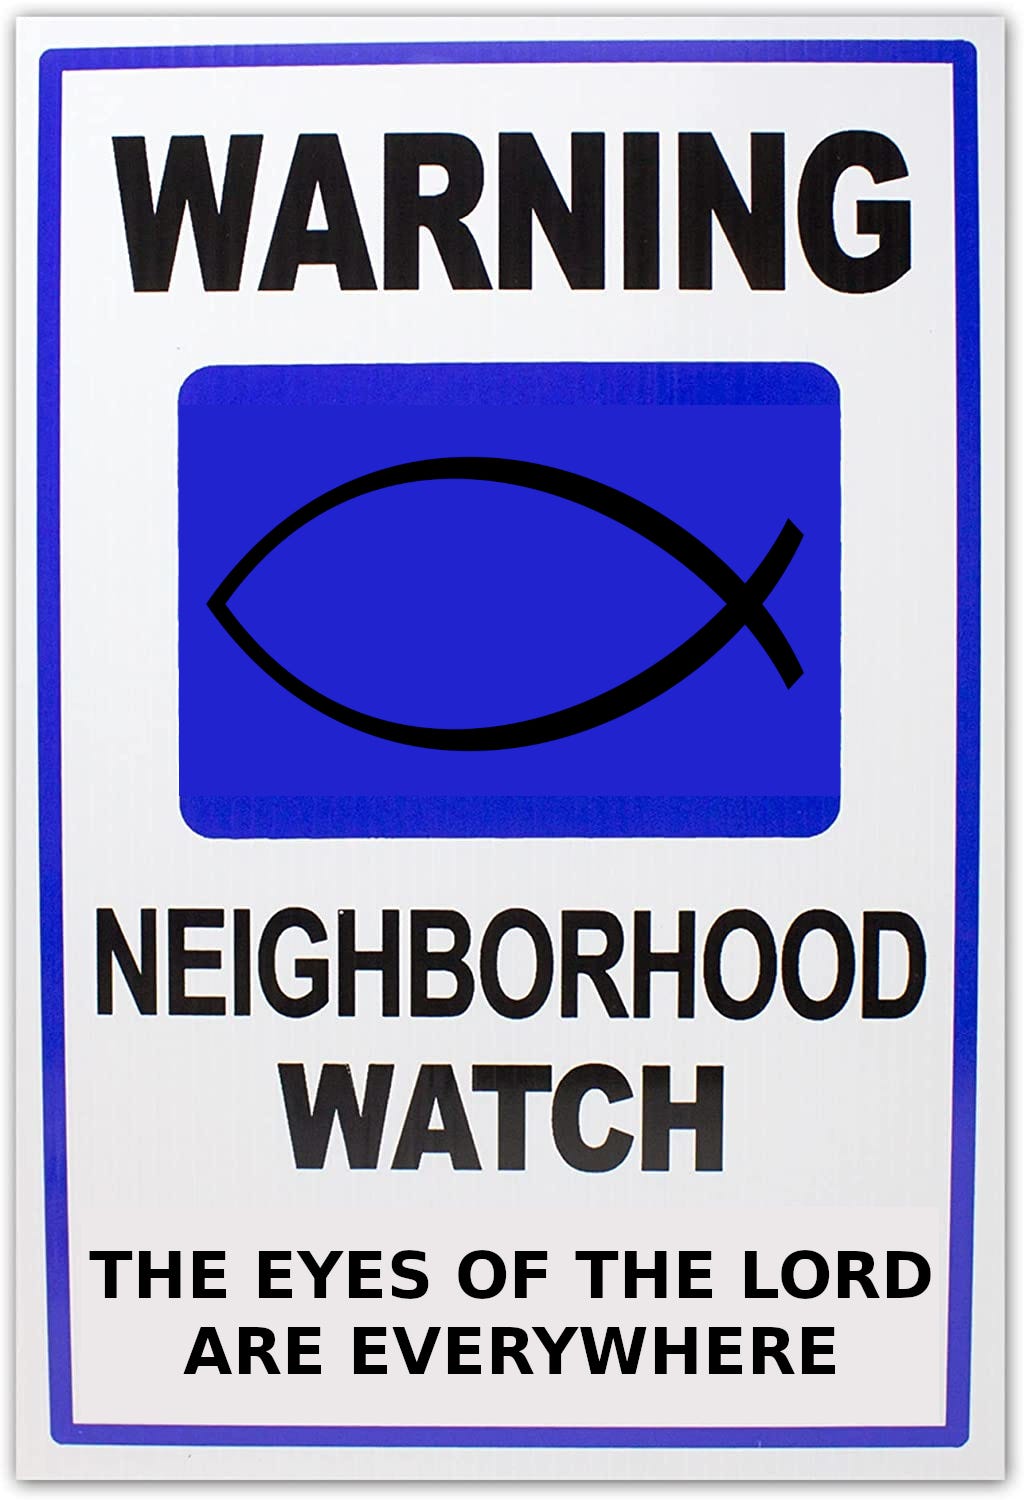 Neighborhood Watch sign, with Christian Ichthys sign symbol of Jesus.  With Psalms 15:3 variation quotation on eyes of the Lord. 